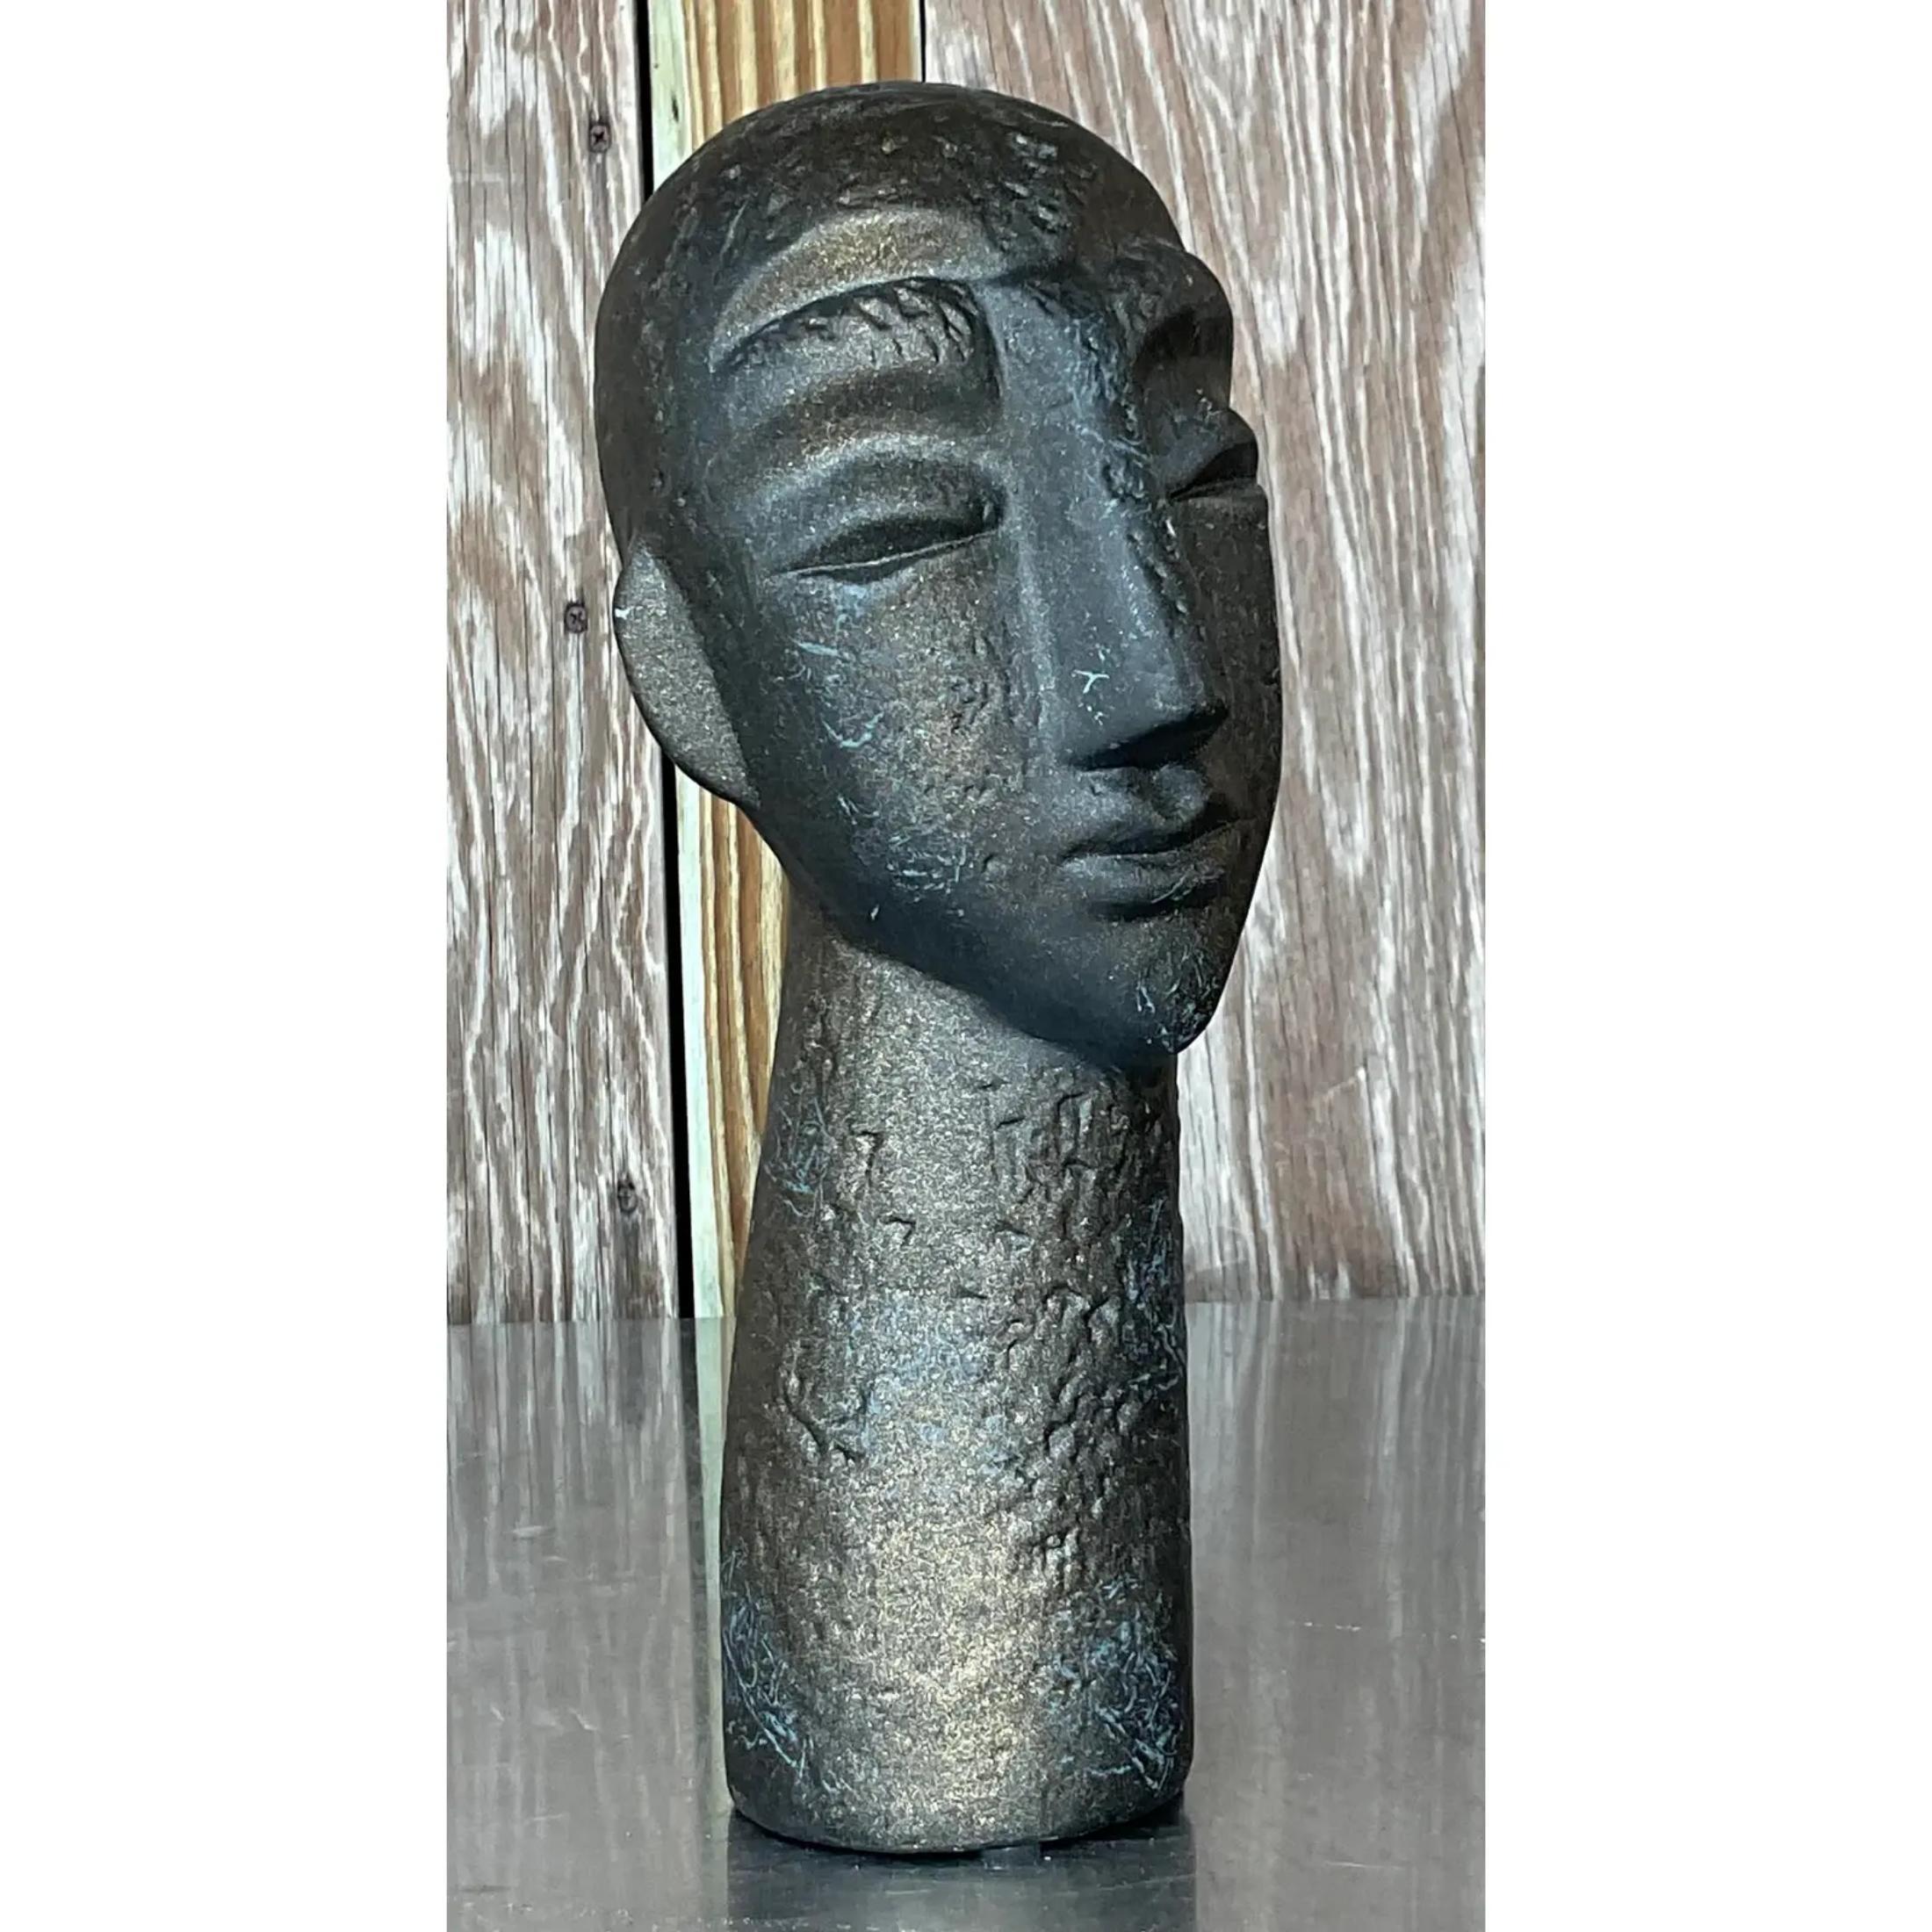 A fabulous vintage Boho Abstract bust. A chic matte finish with beautiful texture detail